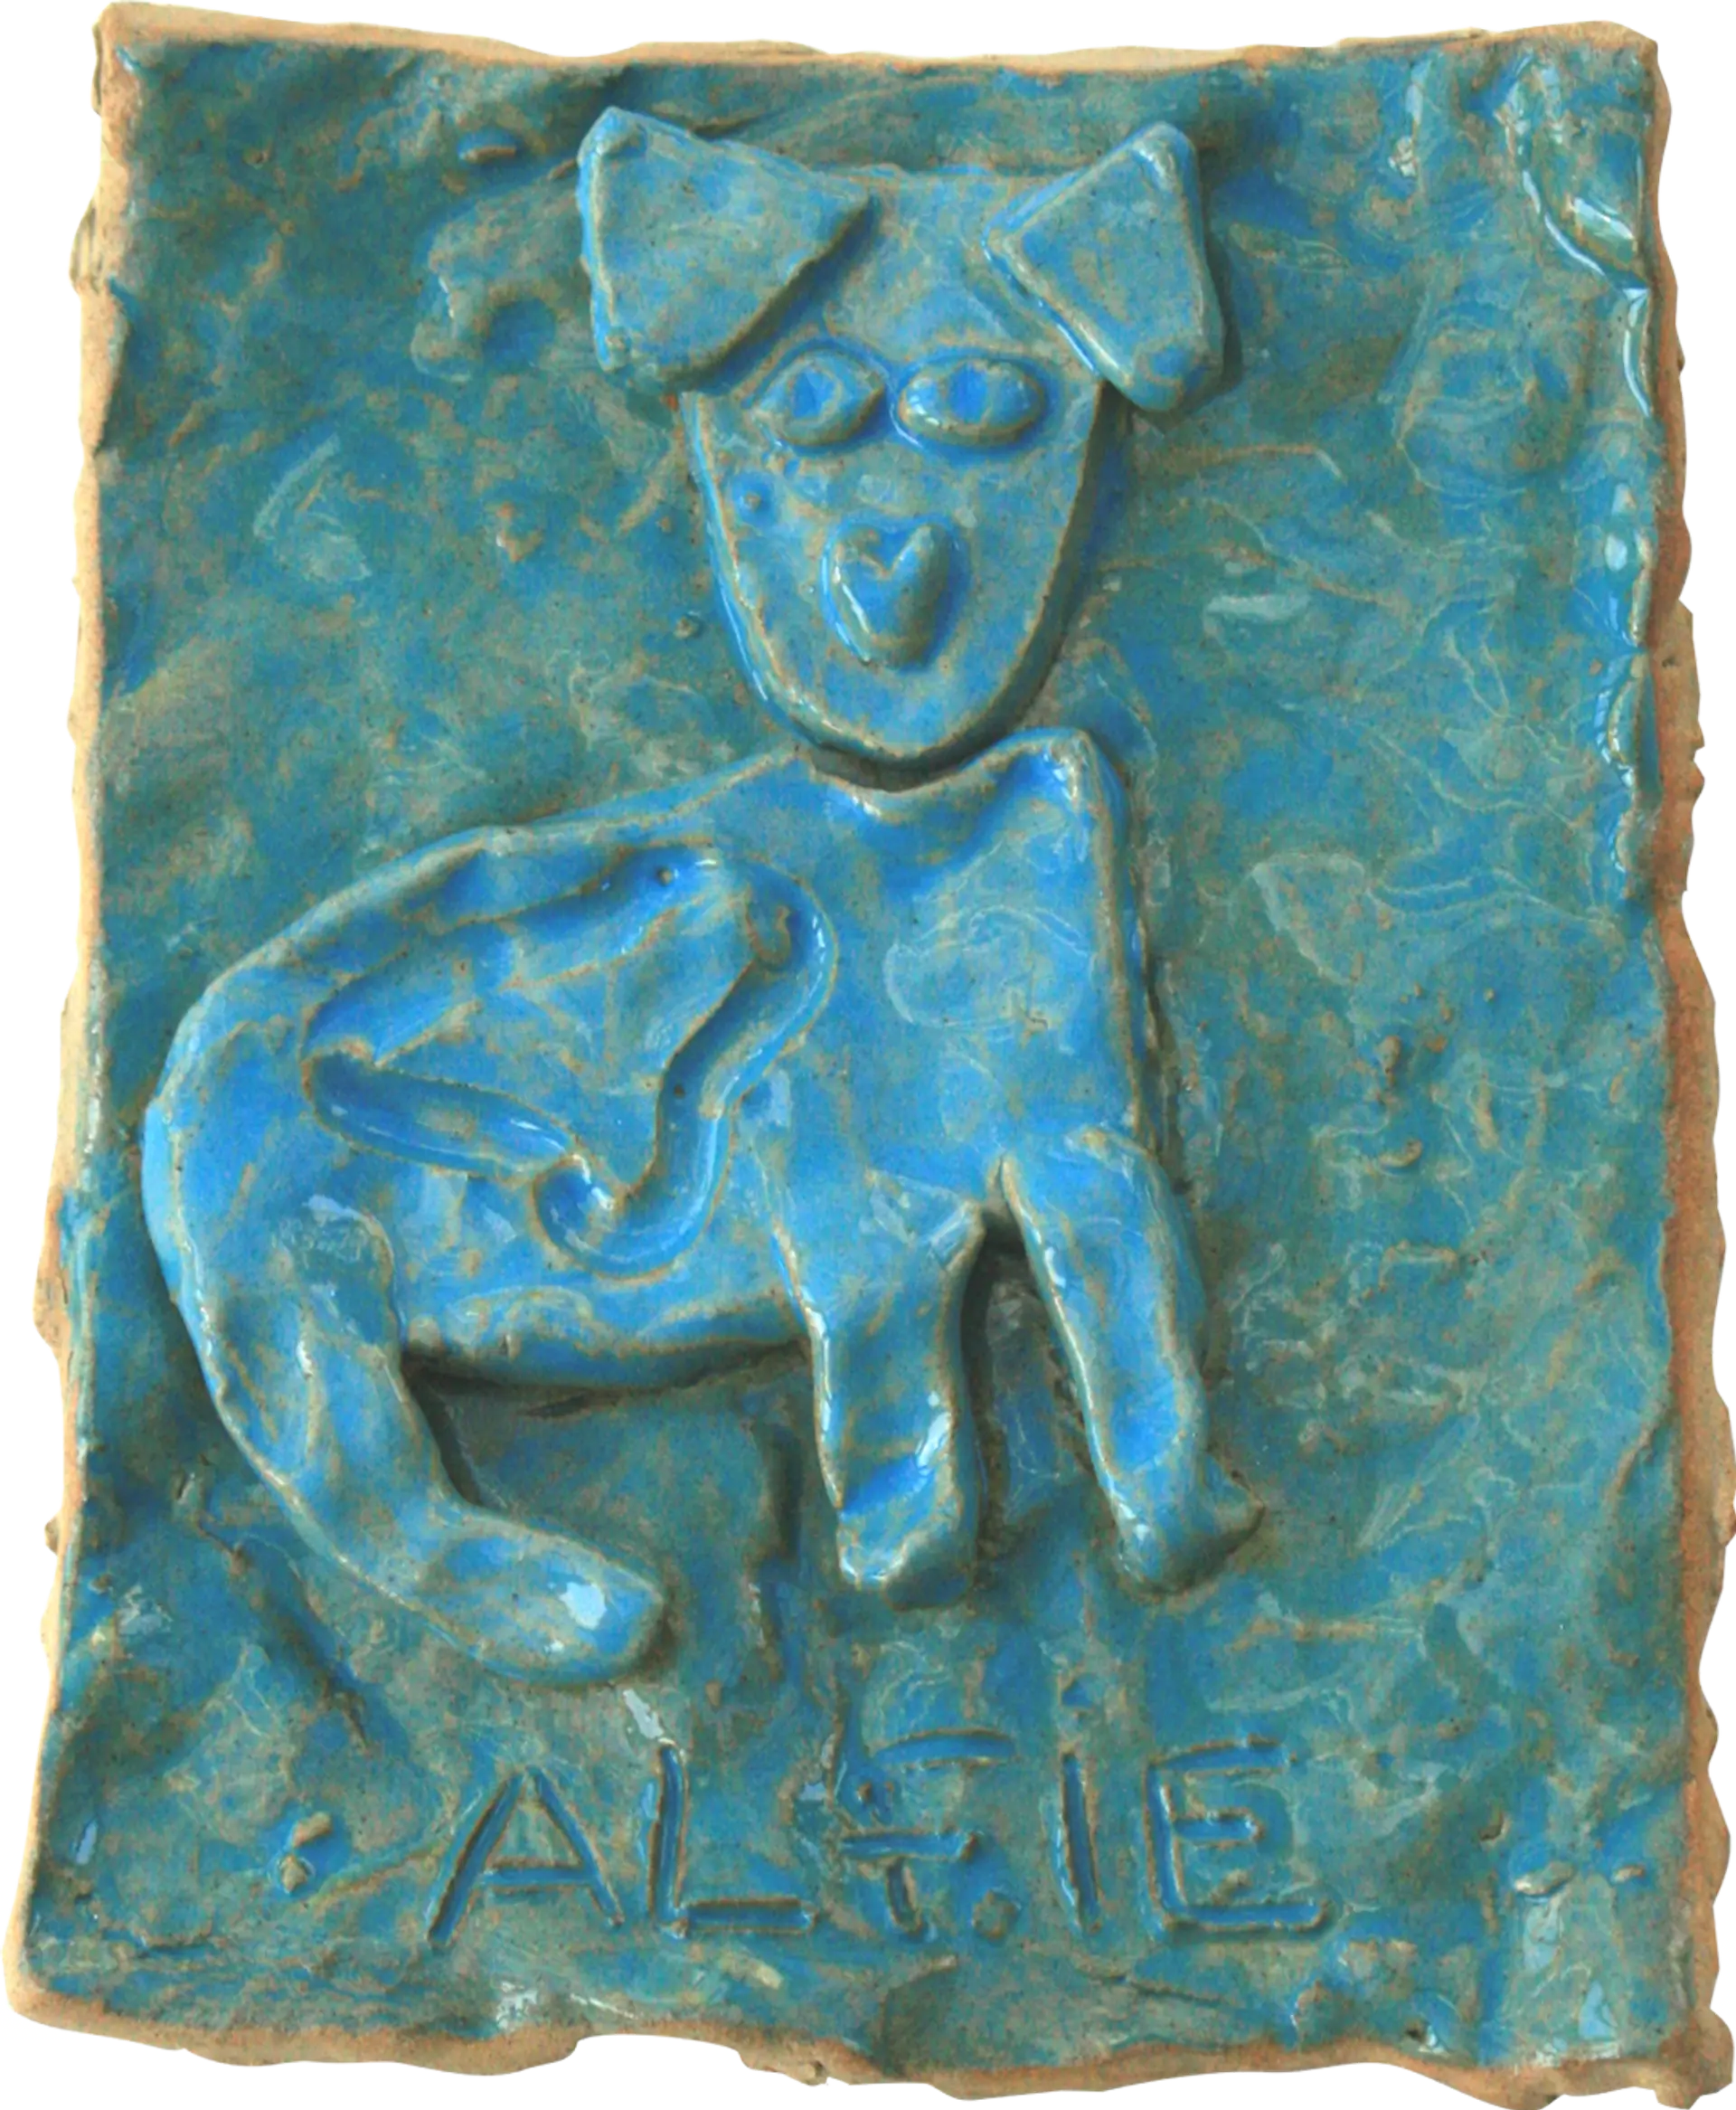 A blue glazed ceramic tile of Alfie, Clair’s pet dog. His name is written along the bottom of the tile.